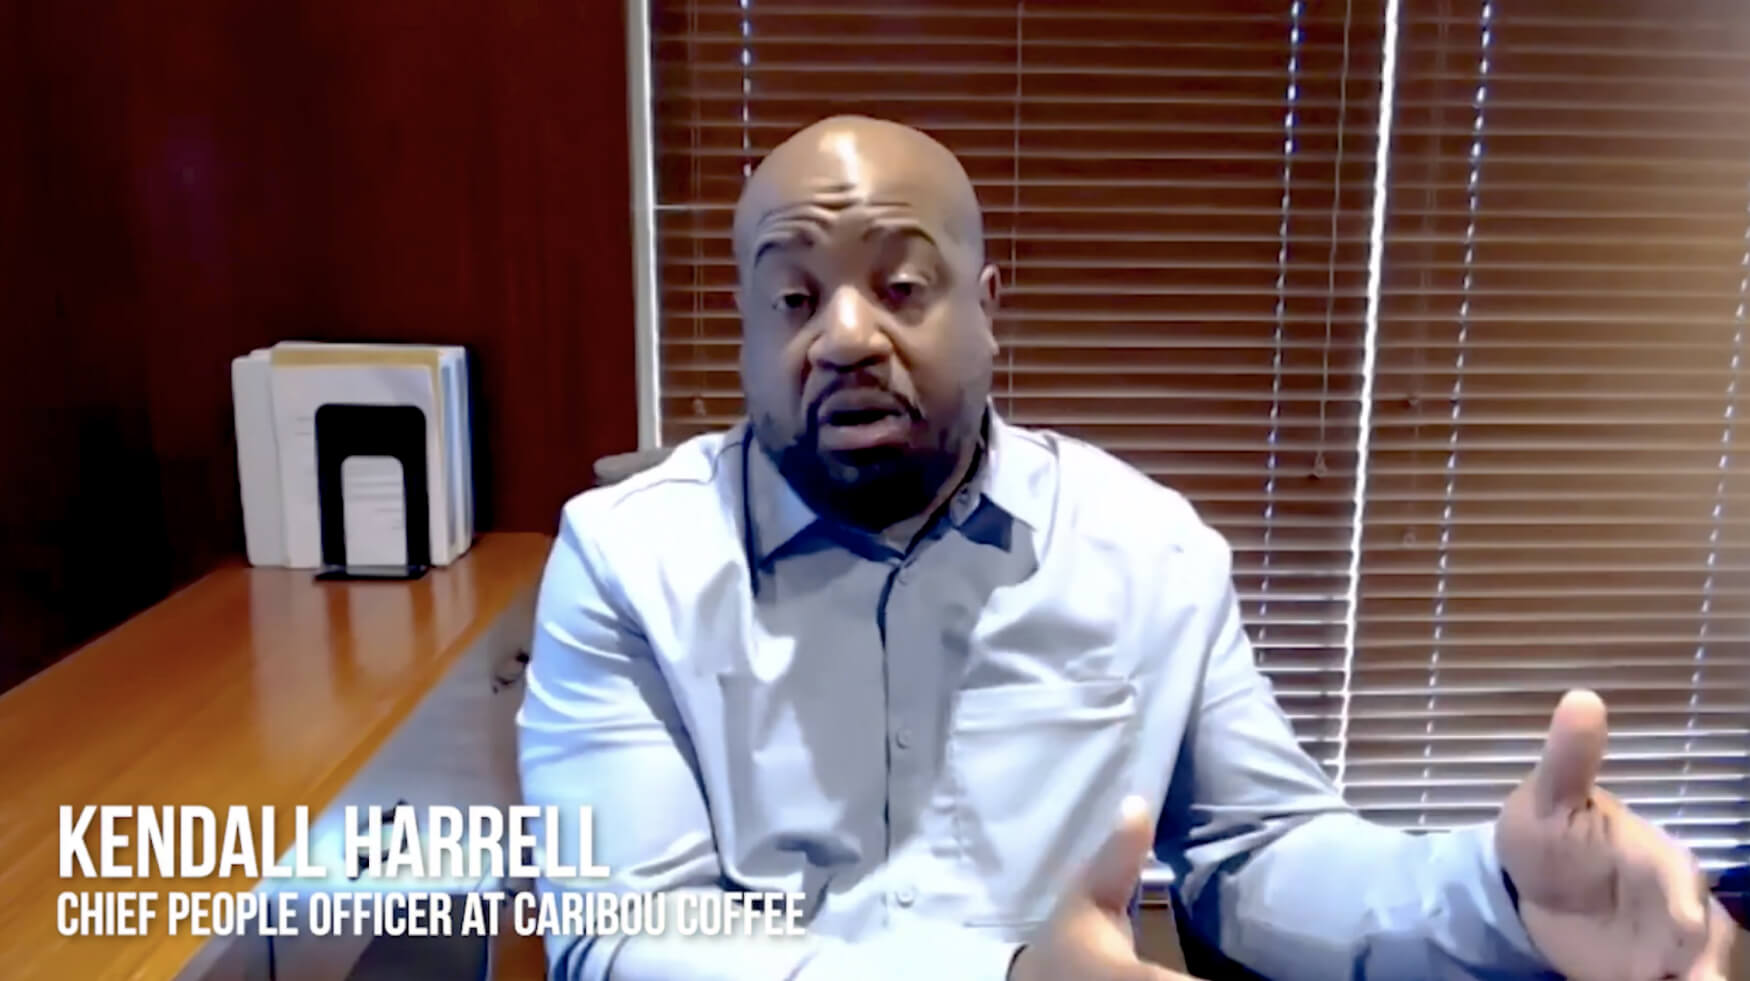 Kendall Harrell - Chief People Officer at Caribou Coffee - shares his experience with Equimetrics